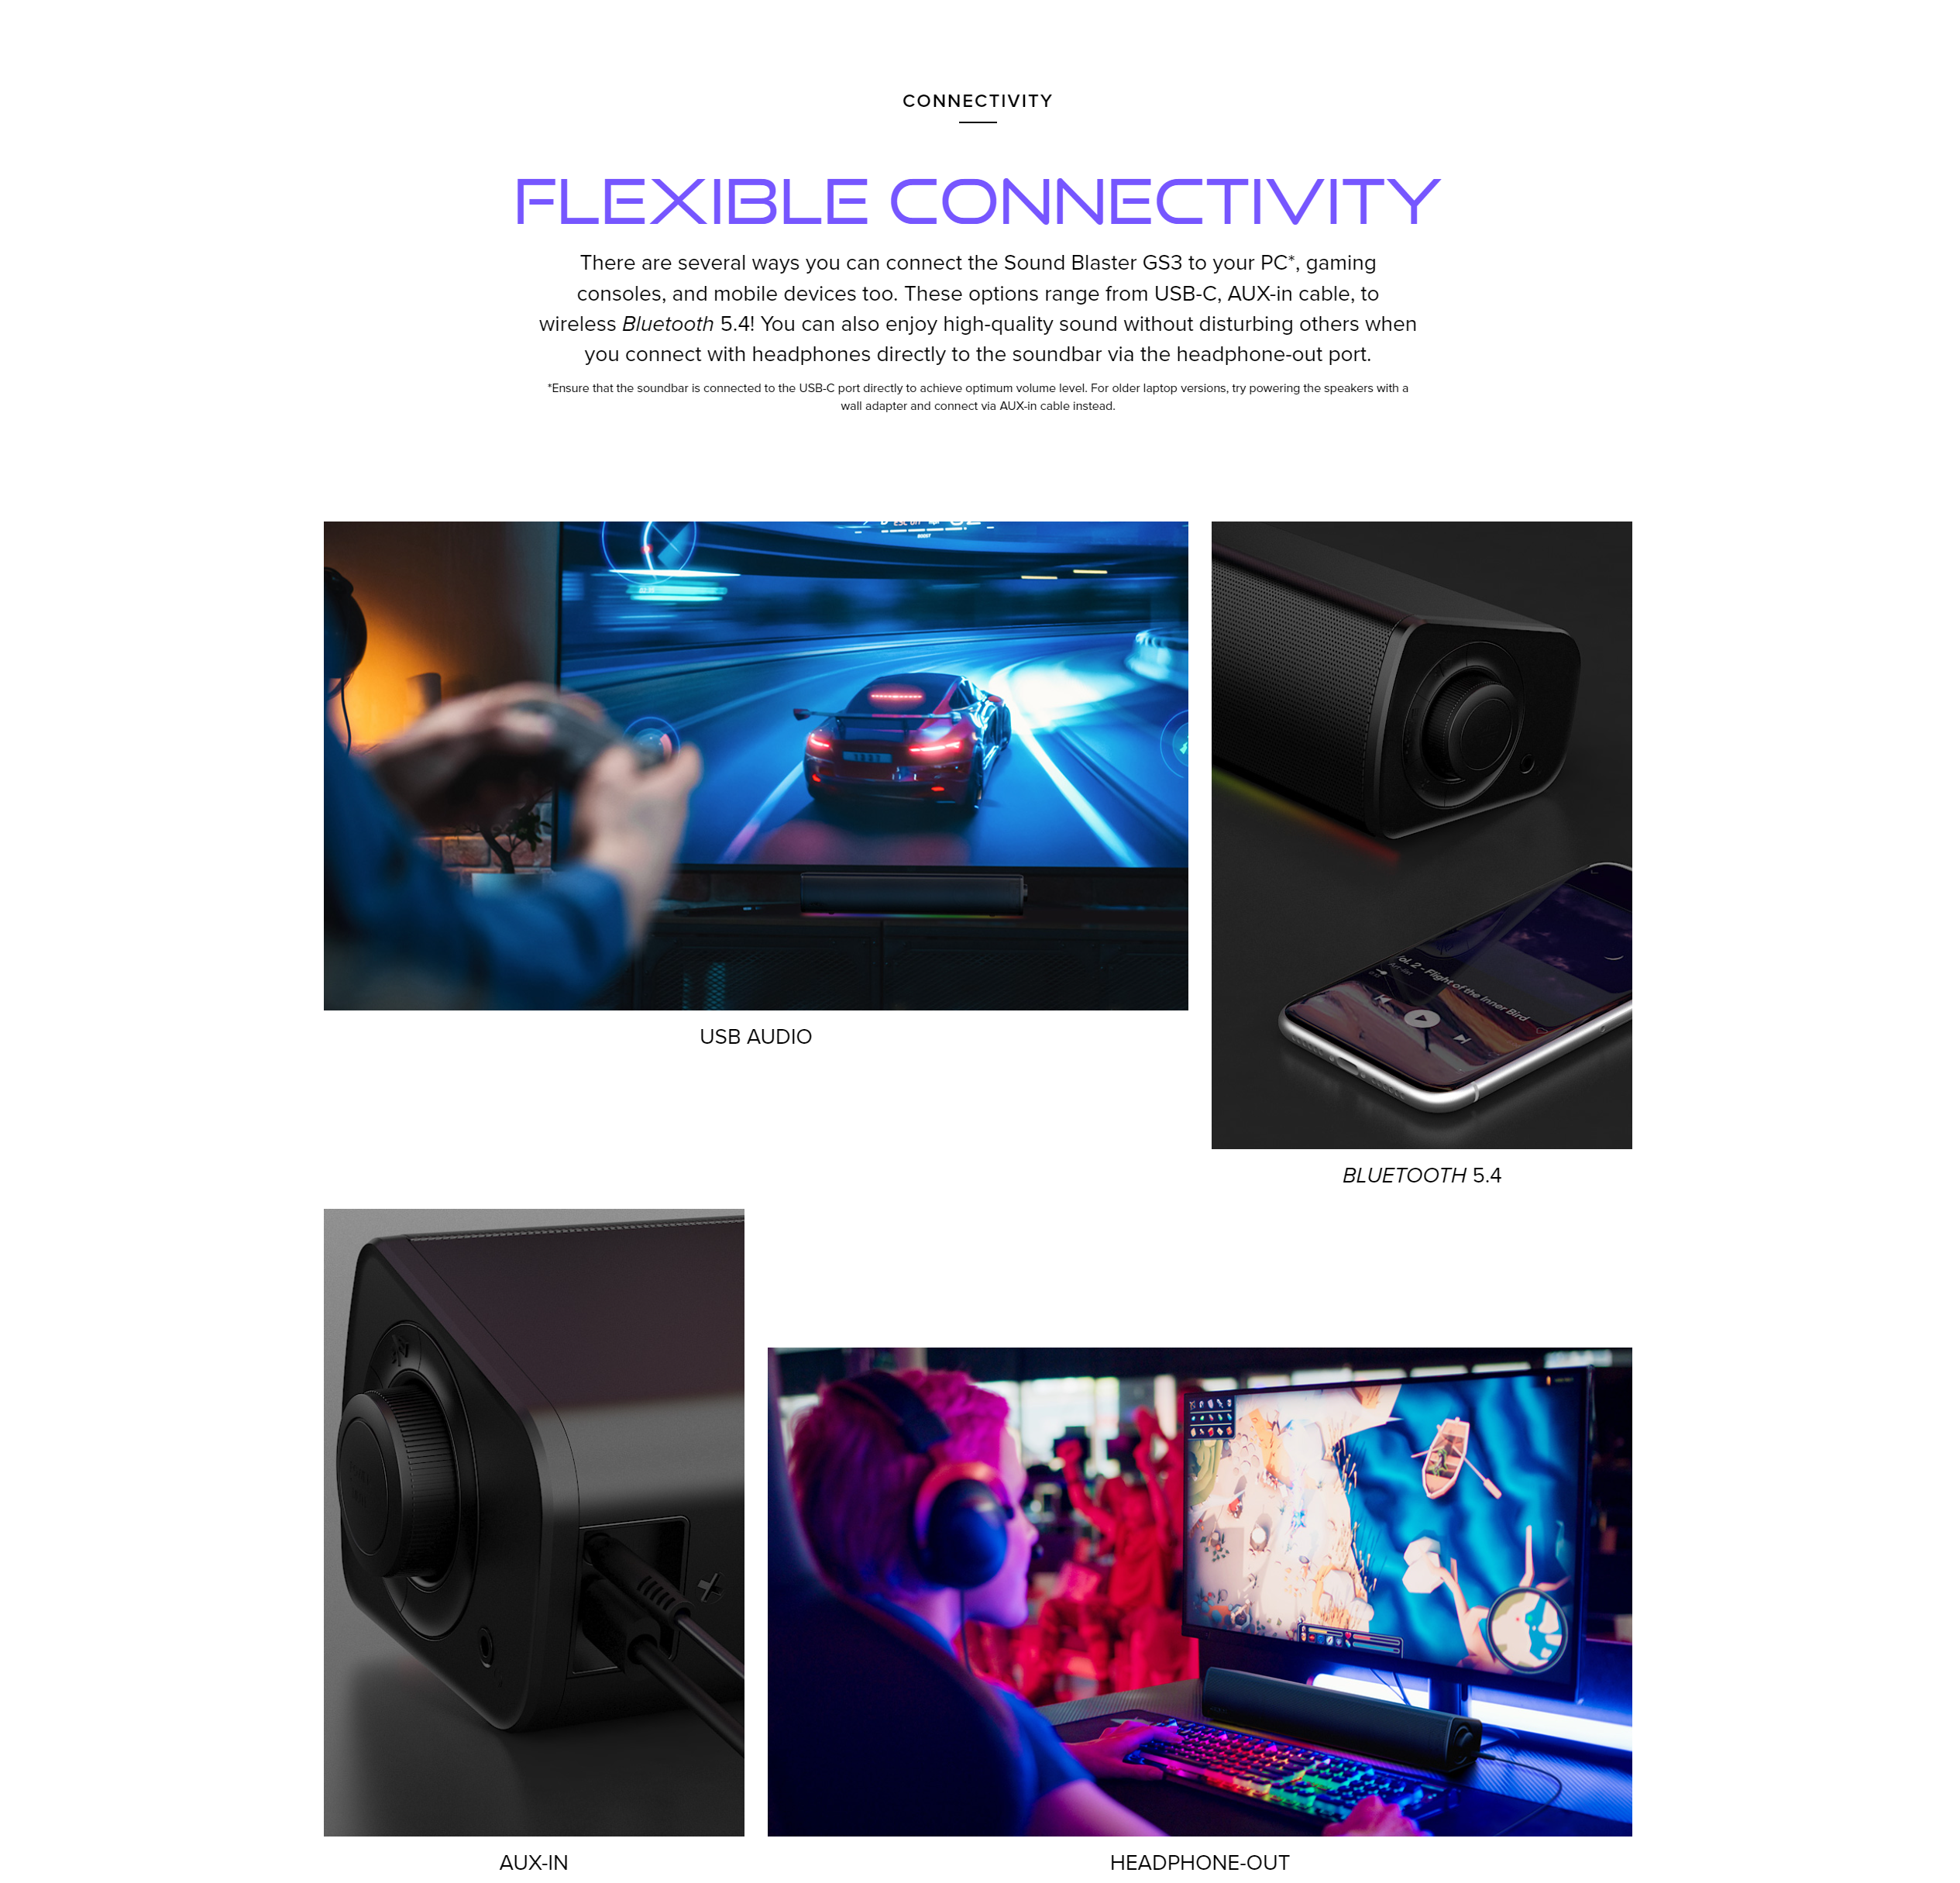 A large marketing image providing additional information about the product Creative Sound Blaster GS3 Compact RGB Gaming Soundbar - Additional alt info not provided